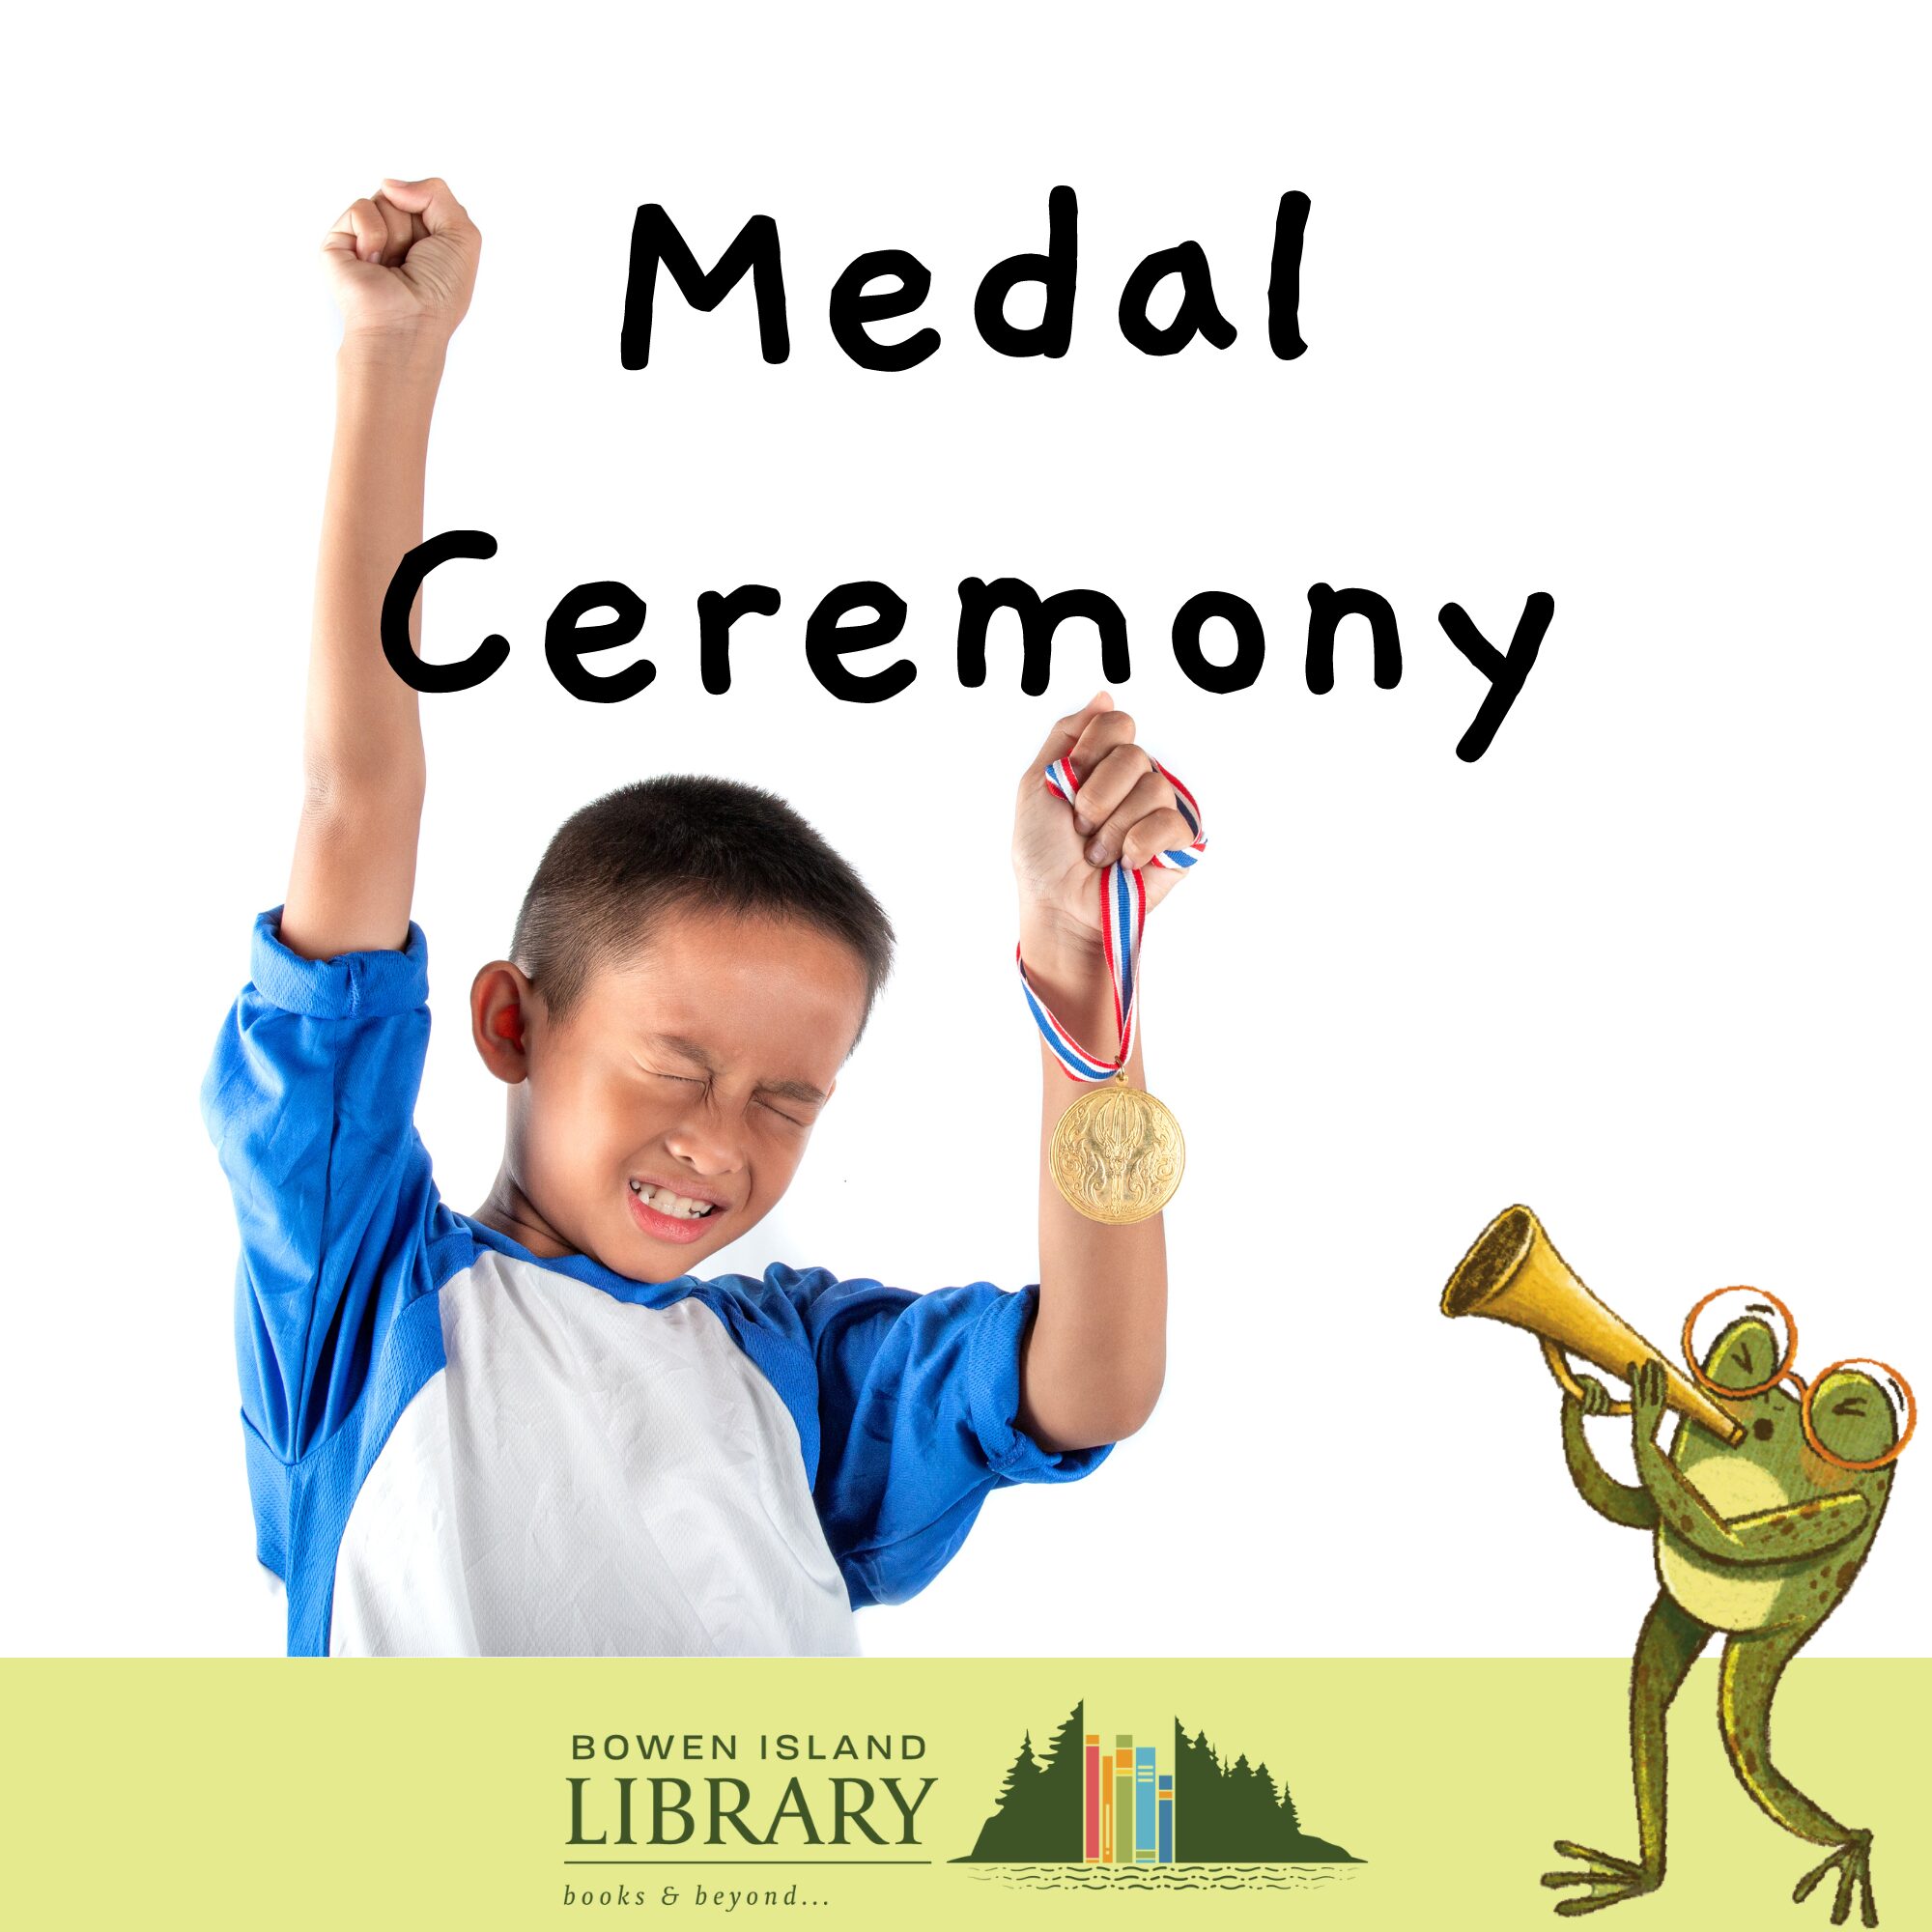 an excited child holding up a medal